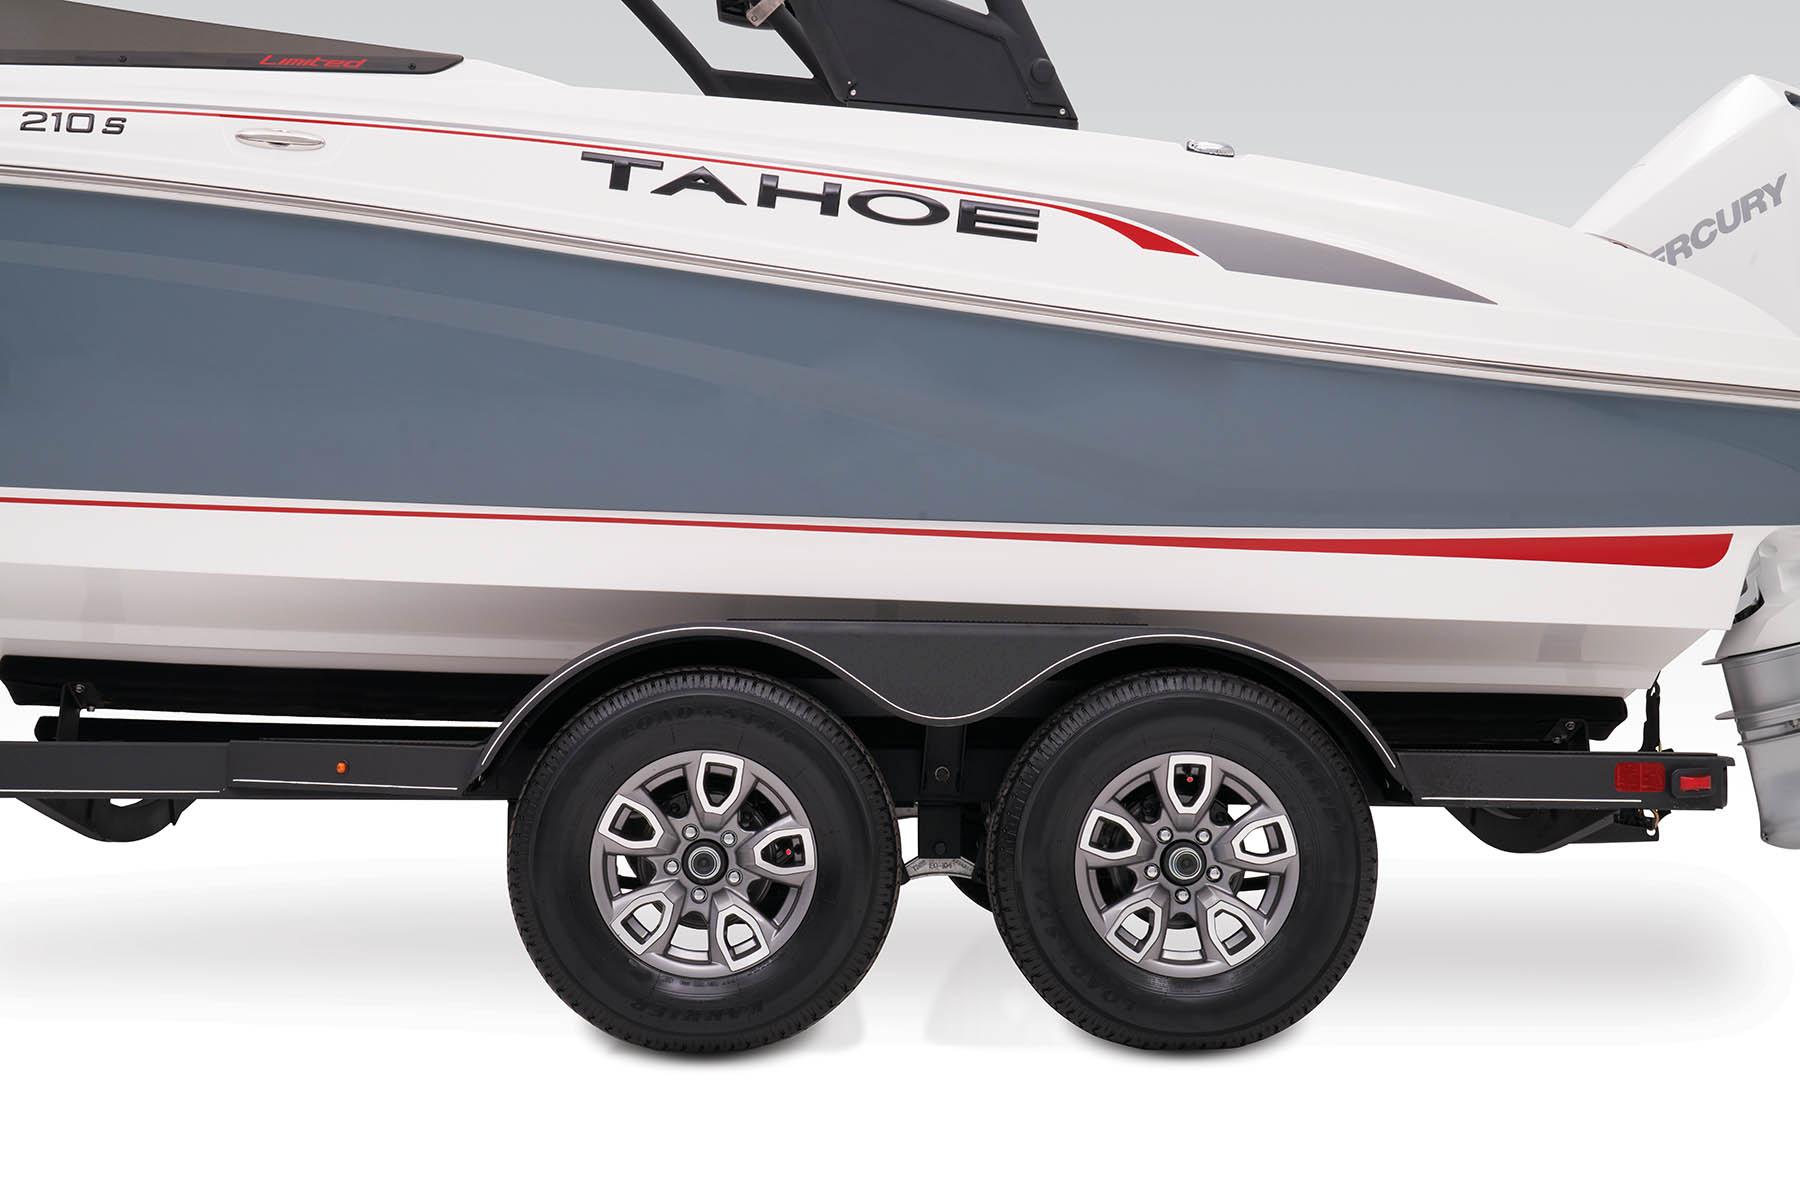 Tahoe 210 S Limited